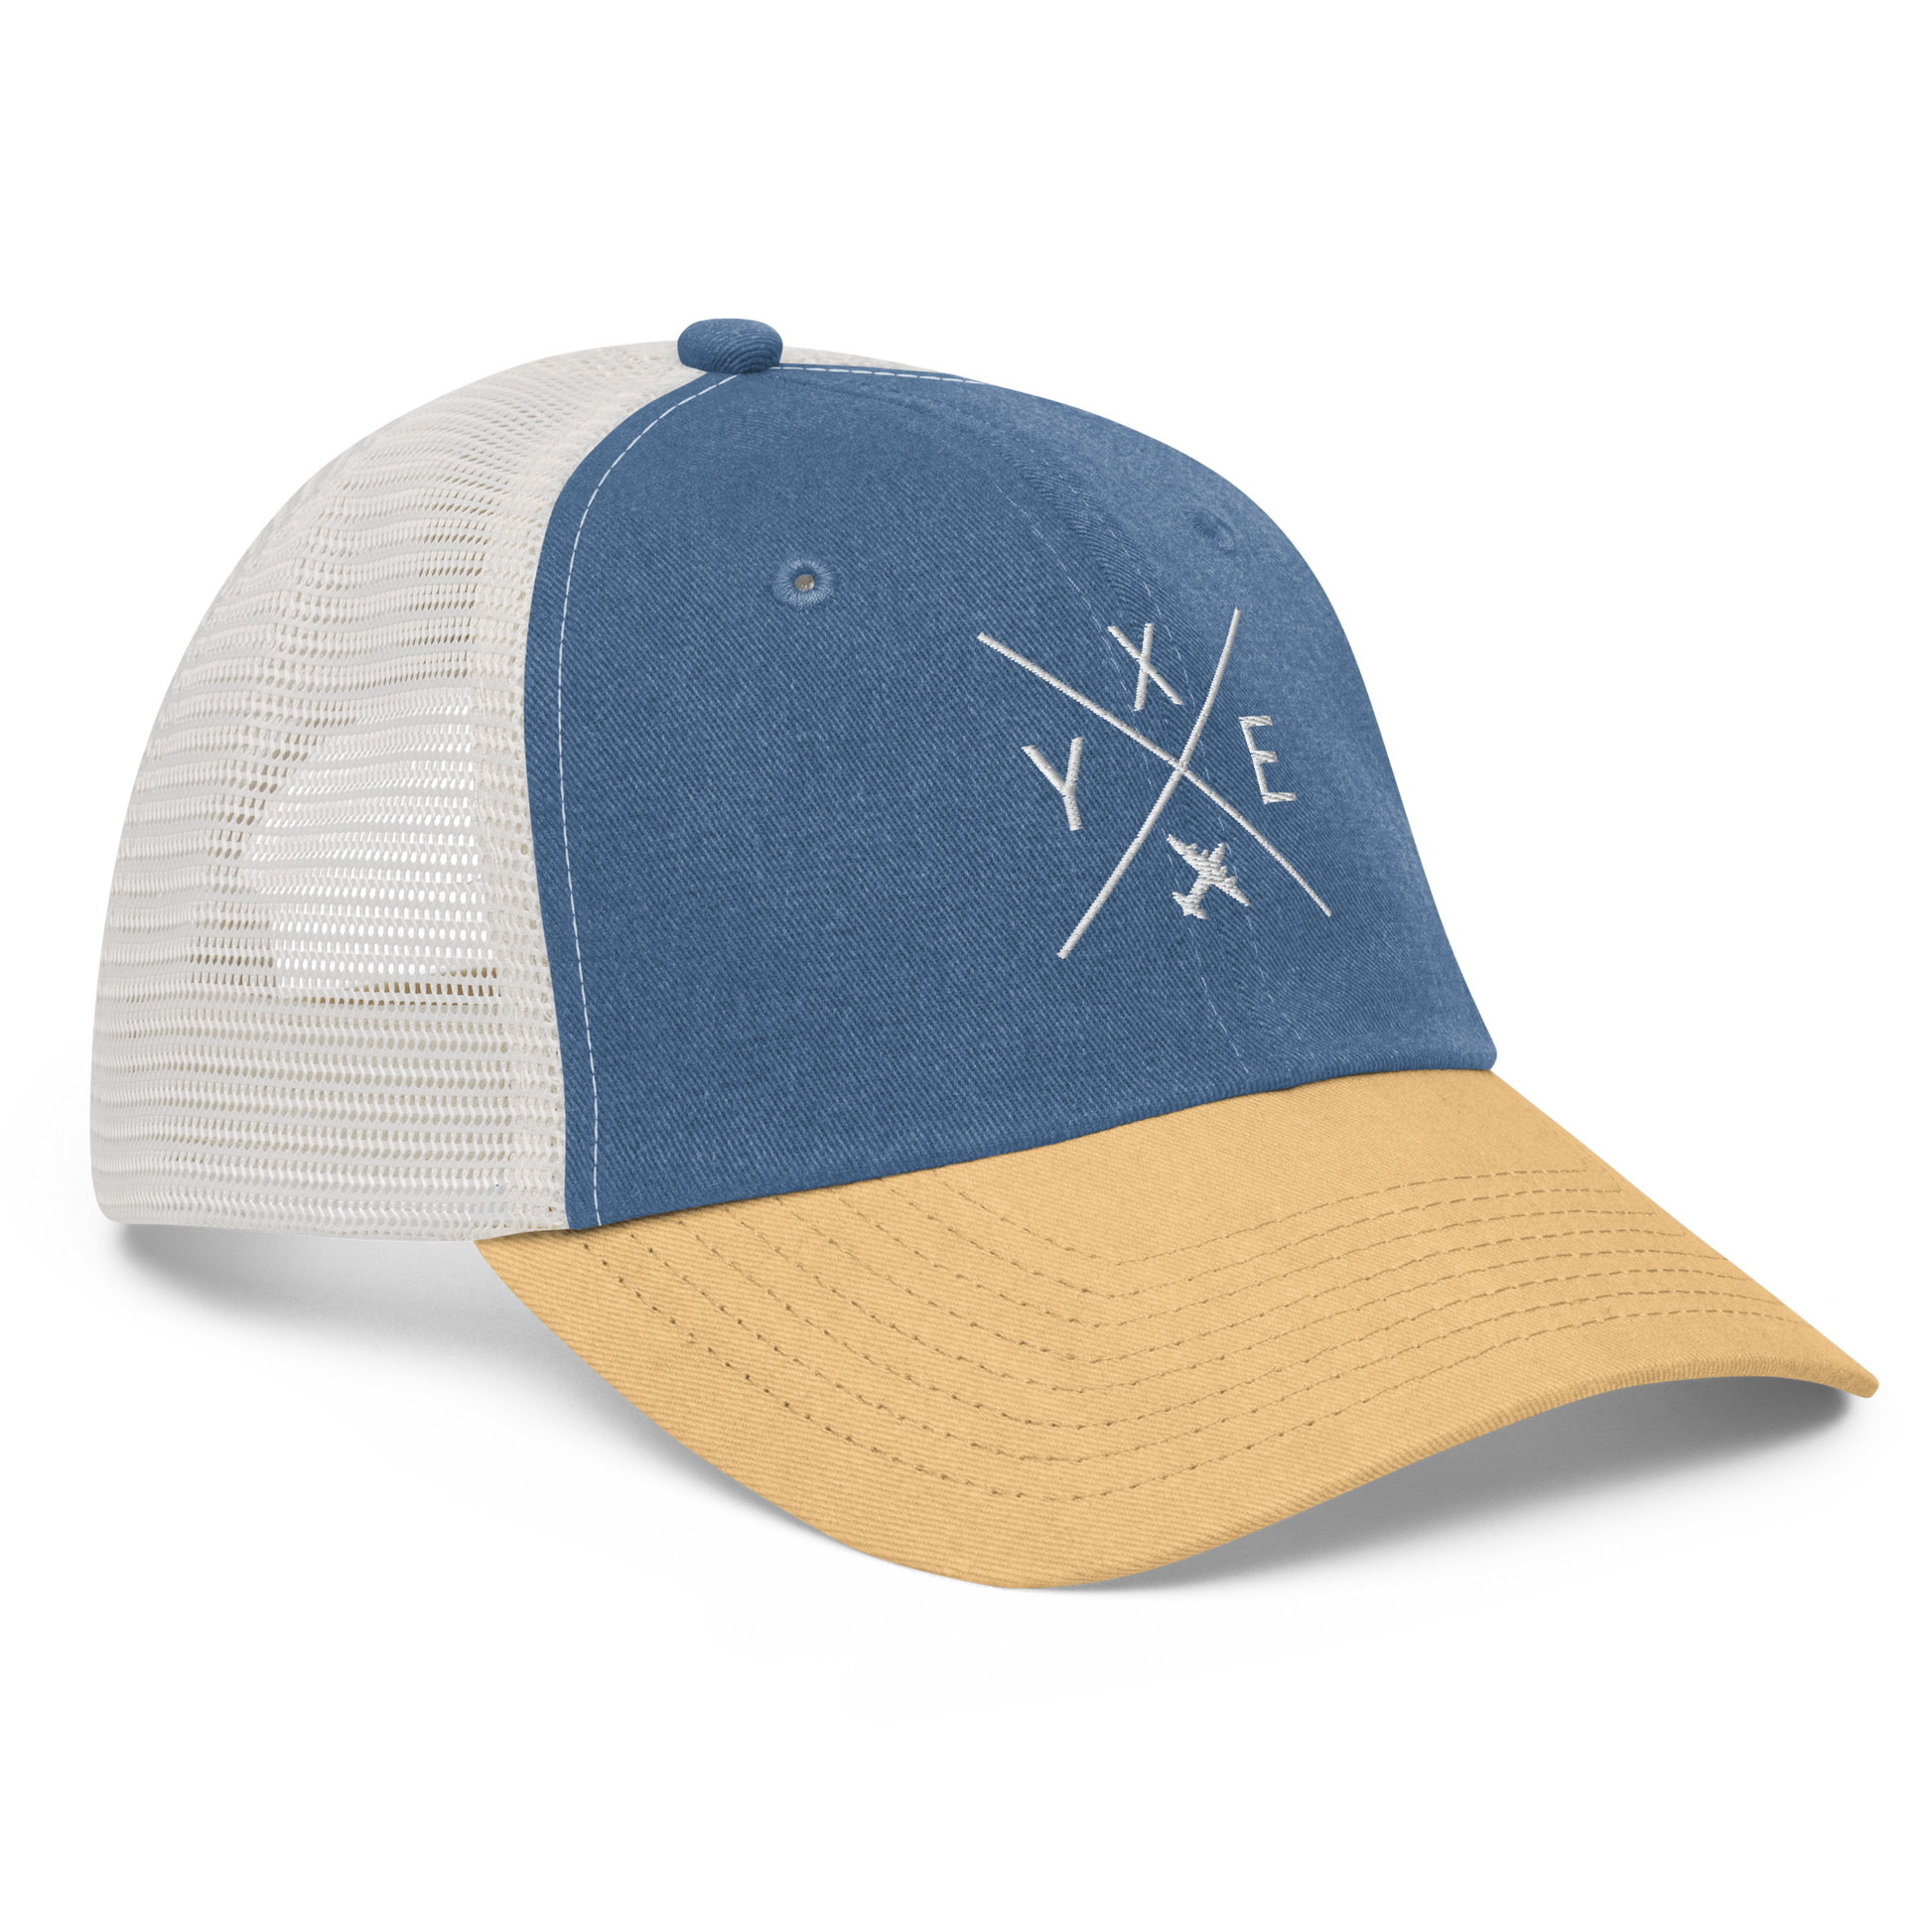 YHM Designs - YXE Saskatoon Pigment-Dyed Trucker Cap - Crossed-X Design with Airport Code and Vintage Propliner - White Embroidery - Image 18